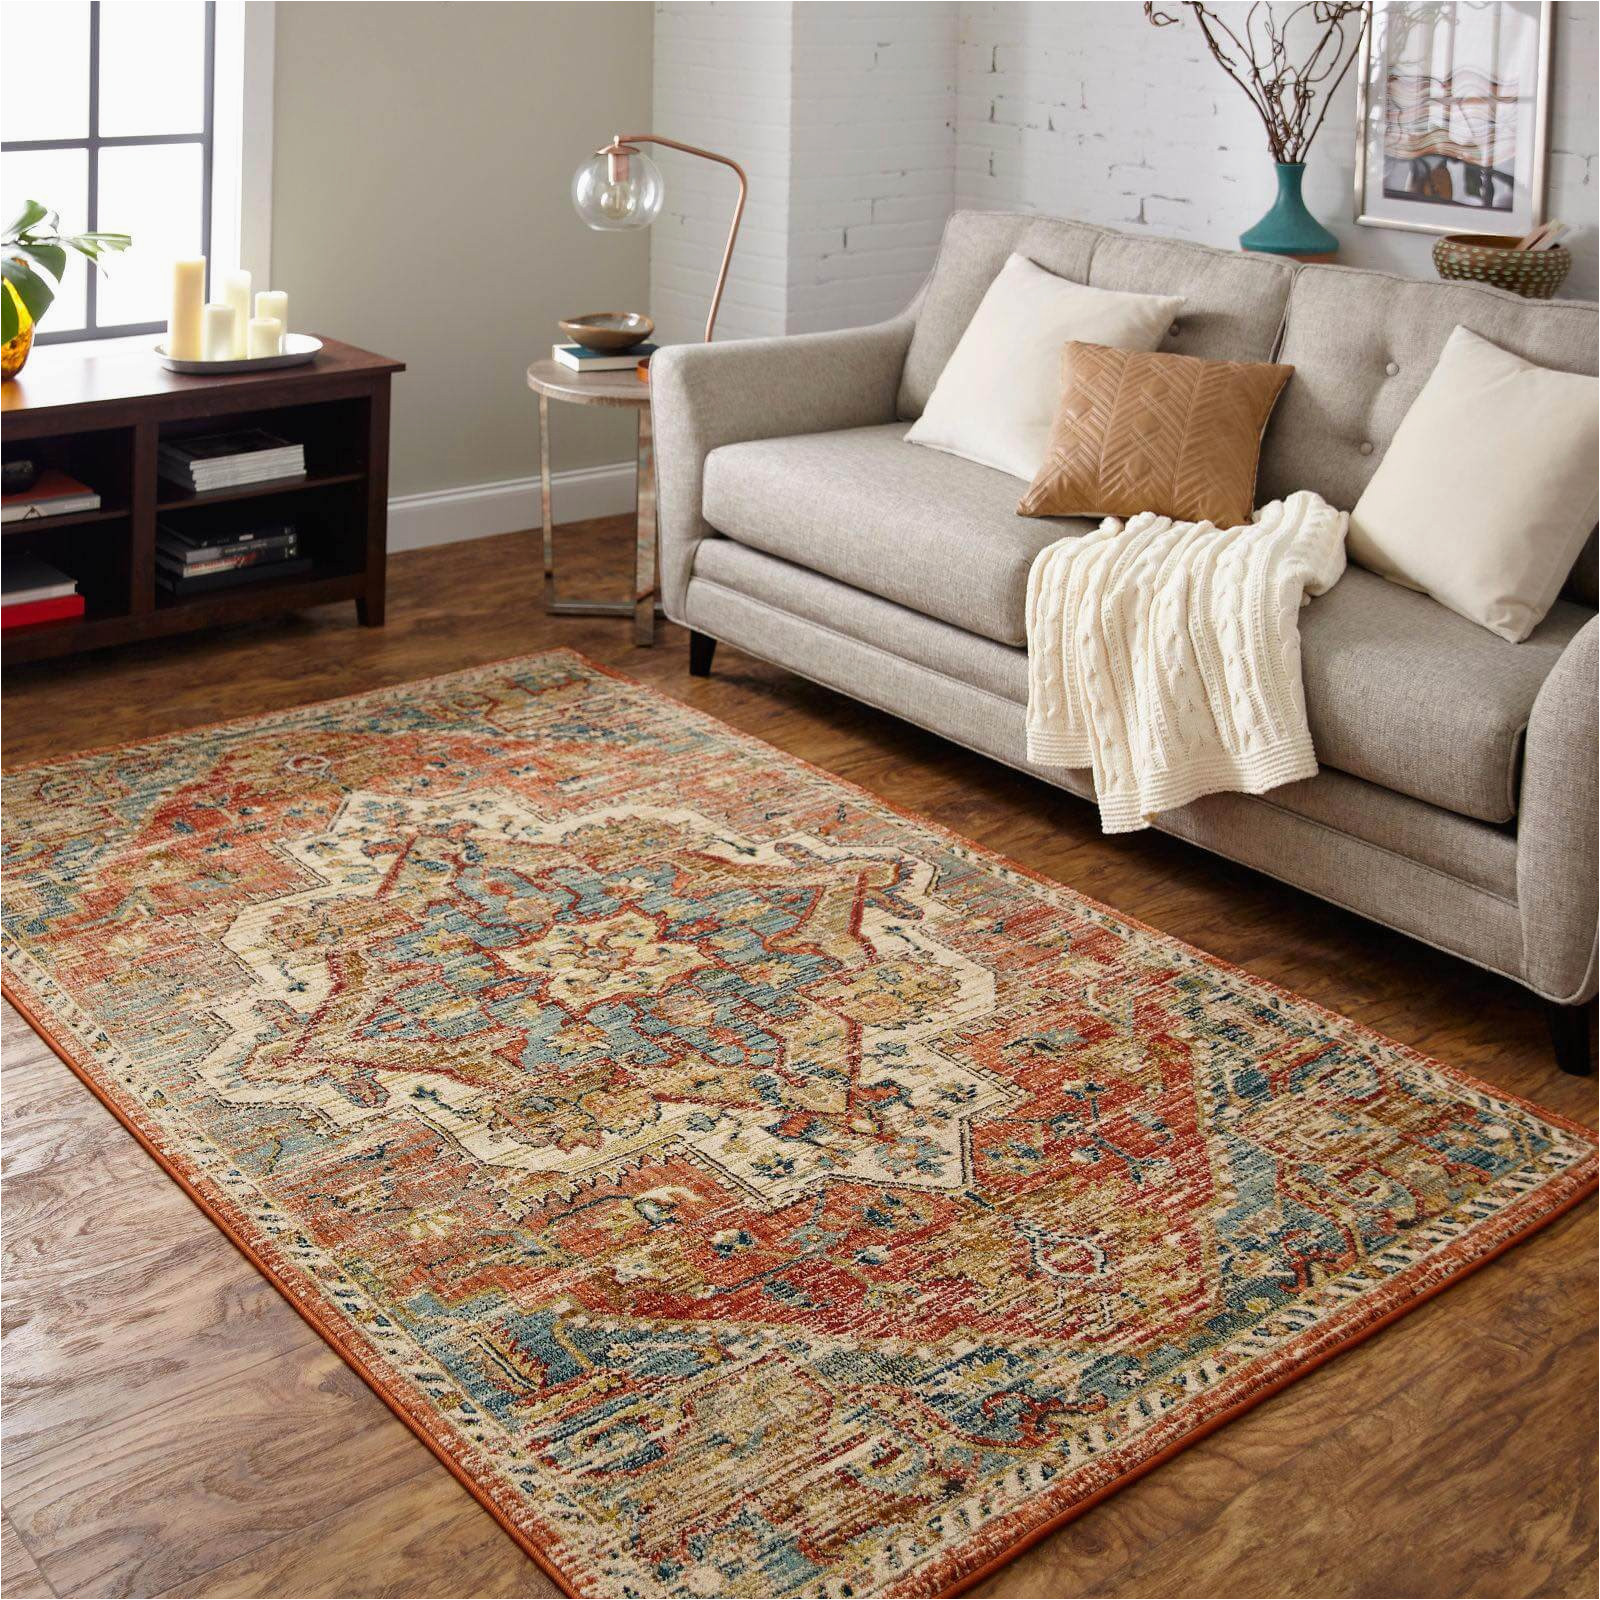 Area Rugs Myrtle Beach Sc How to Select A Rug for Your Living area In Myrtle Beach, Sc …